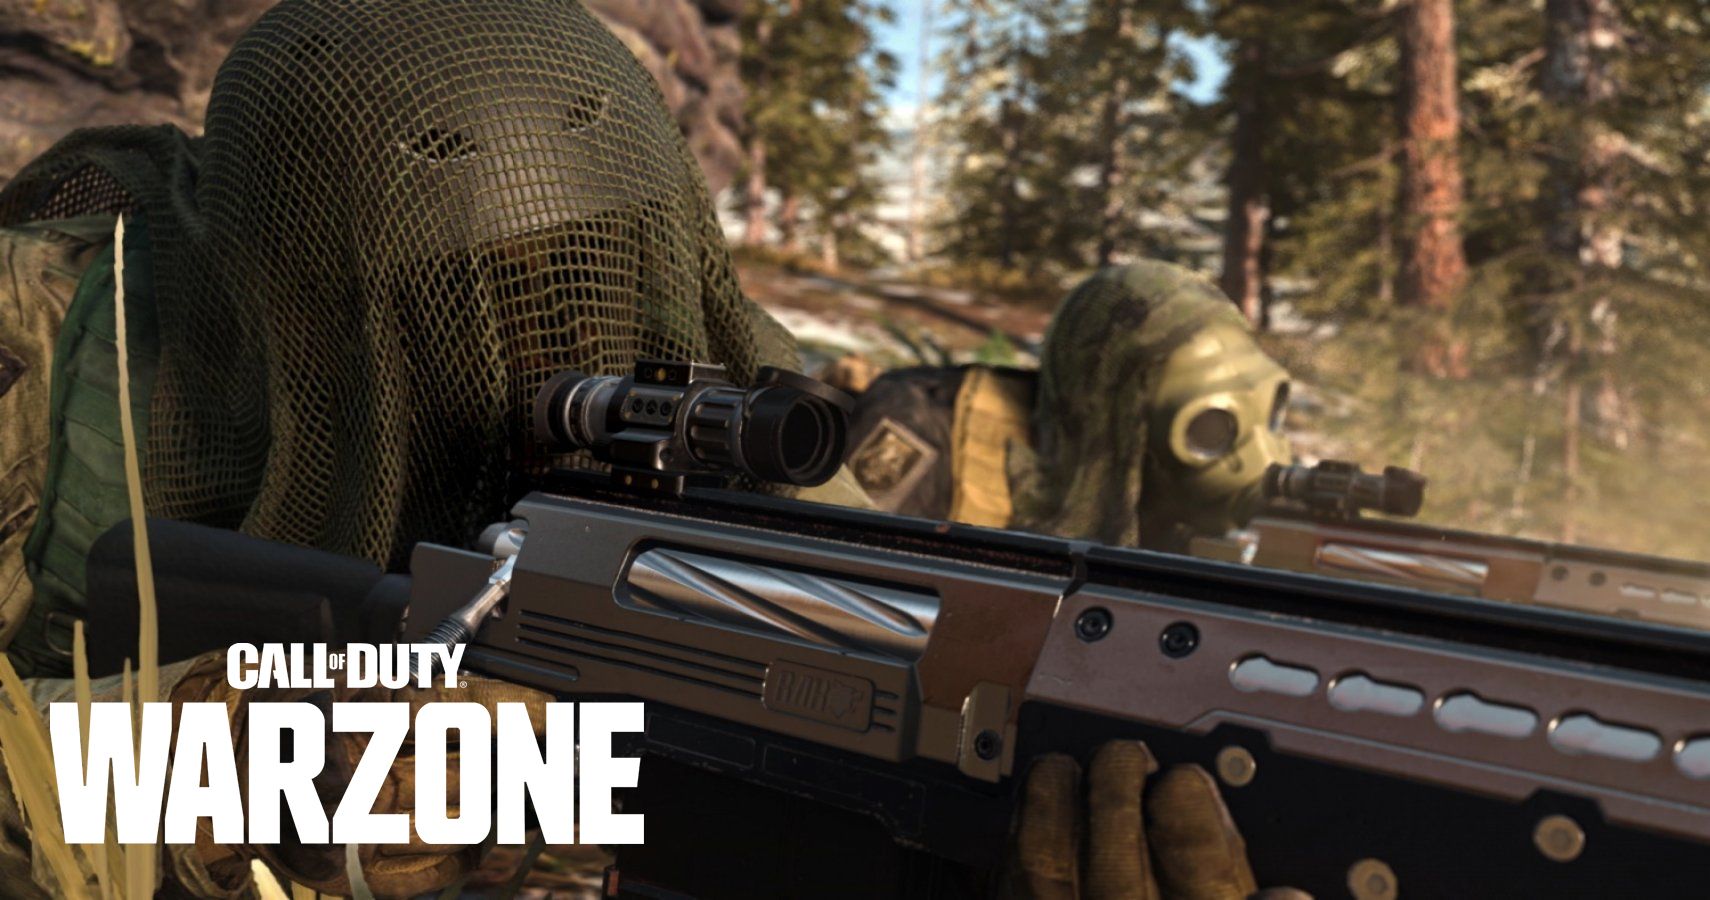 Call of duty warzone two snipers aiming at a target out of frame in a forest